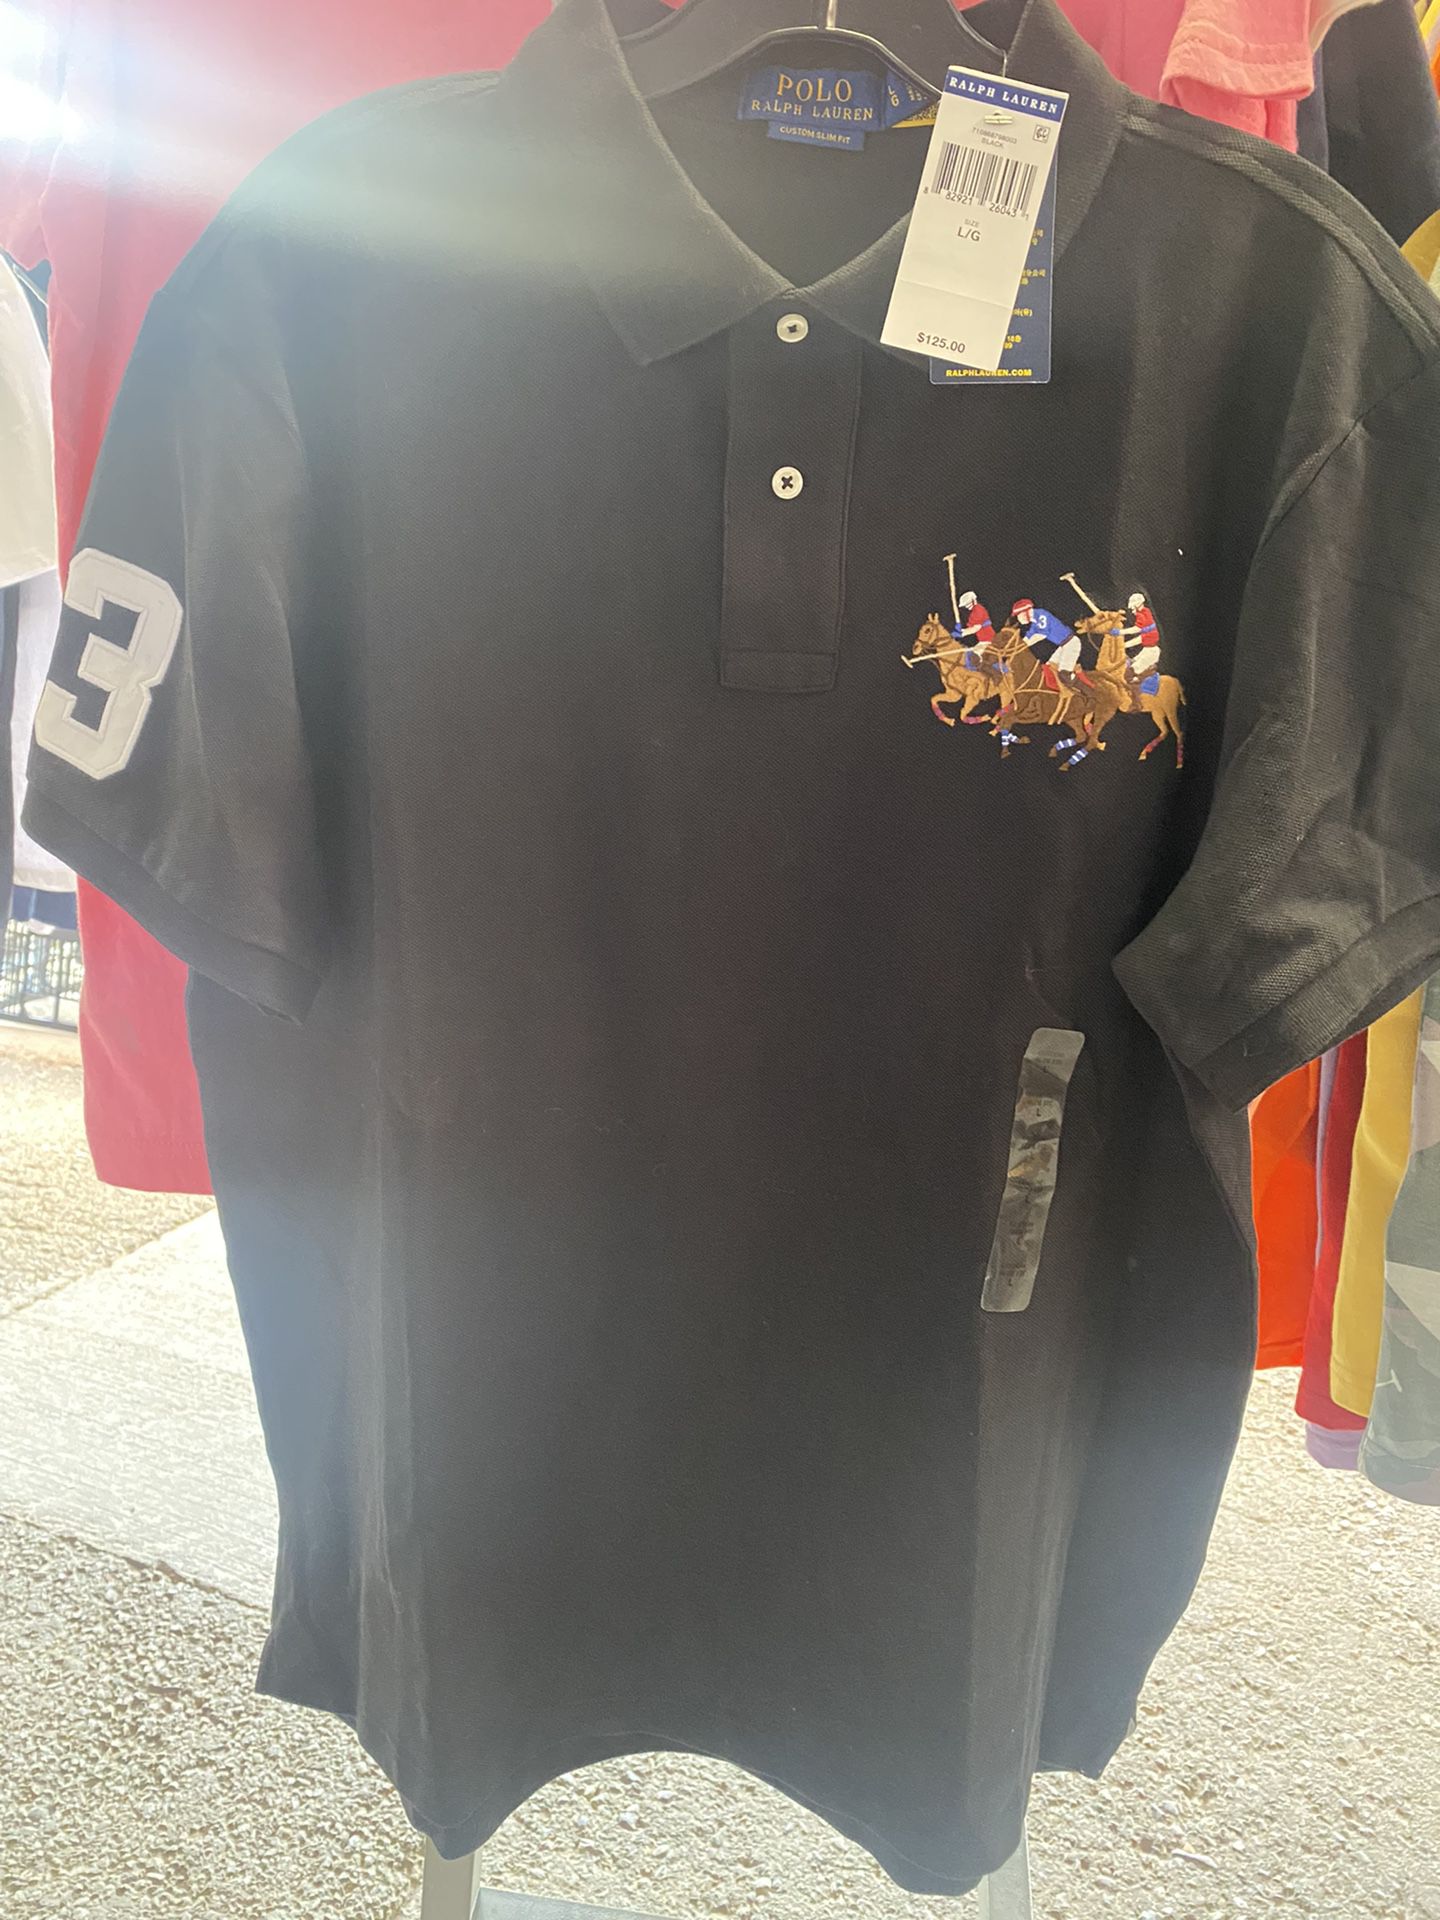 Postbode In de omgeving van Zilver Ralph Lauren polo shirt in green and black original price in store $125 I  only have black M and L. and green L. price $60 for Sale in Las Vegas, NV -  OfferUp